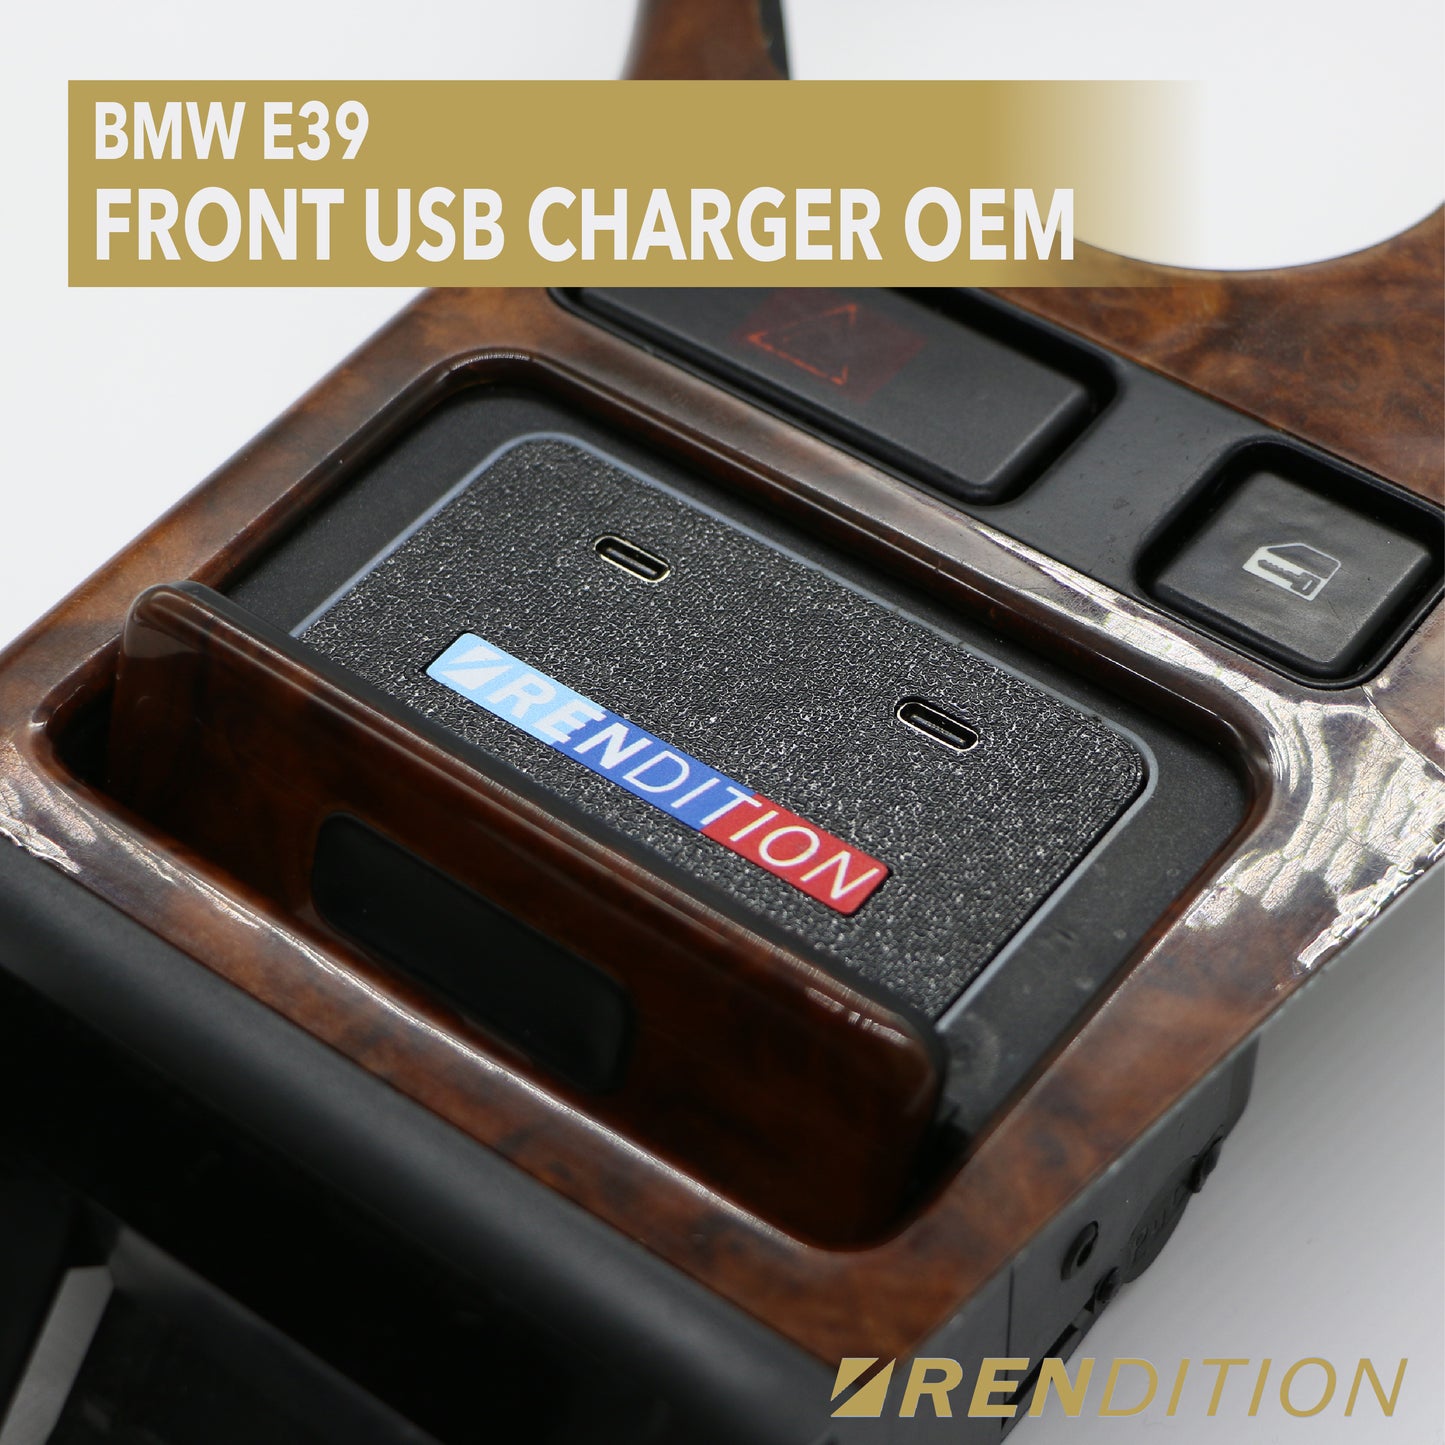 BMW E39 FRONT USB CHARGER OEM